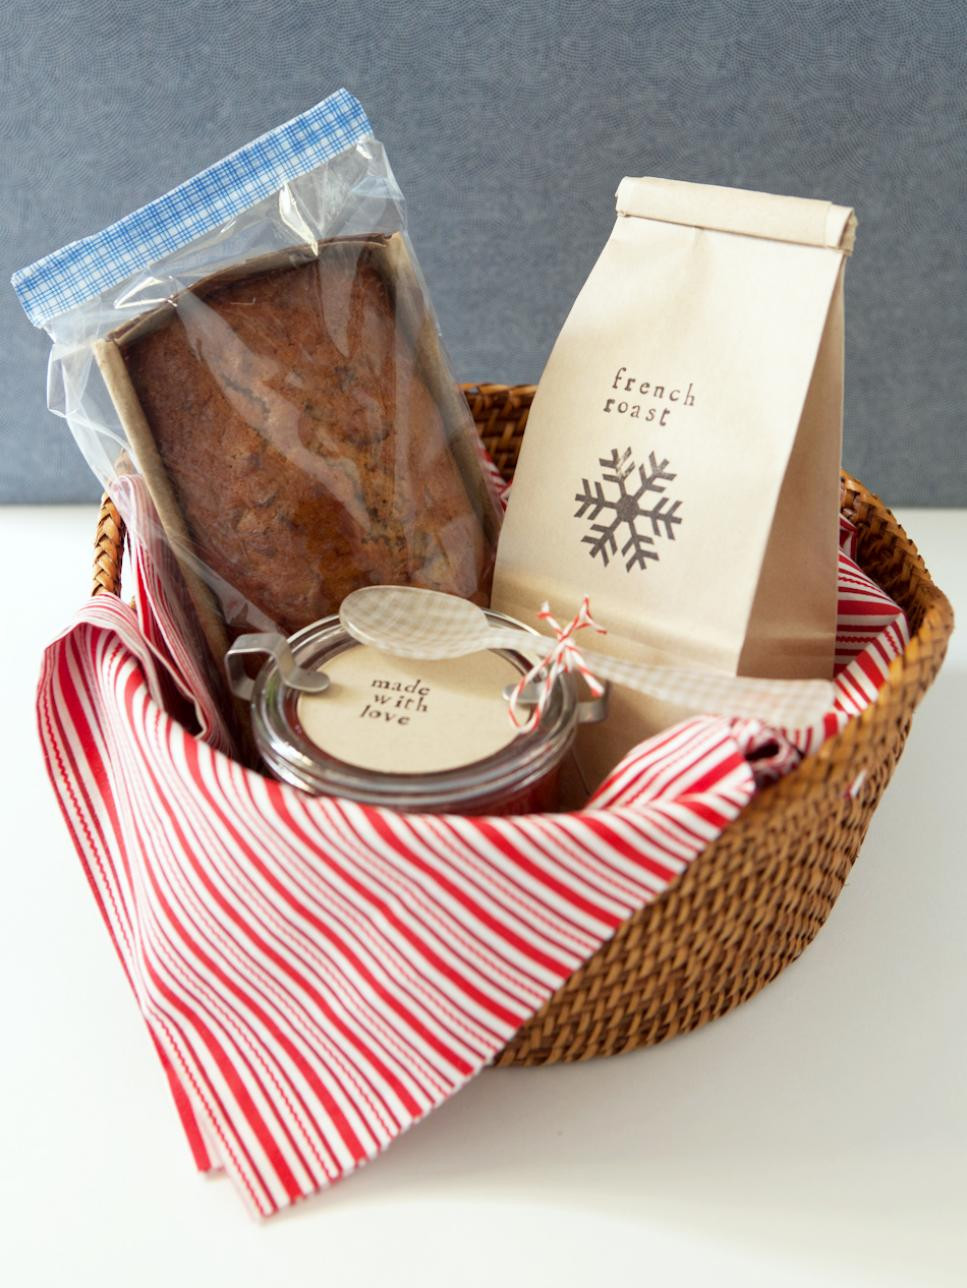 Easy Gift Baskets Ideas
 Last Minute Homemade Gifts 16 Gifts Everyone Will Love